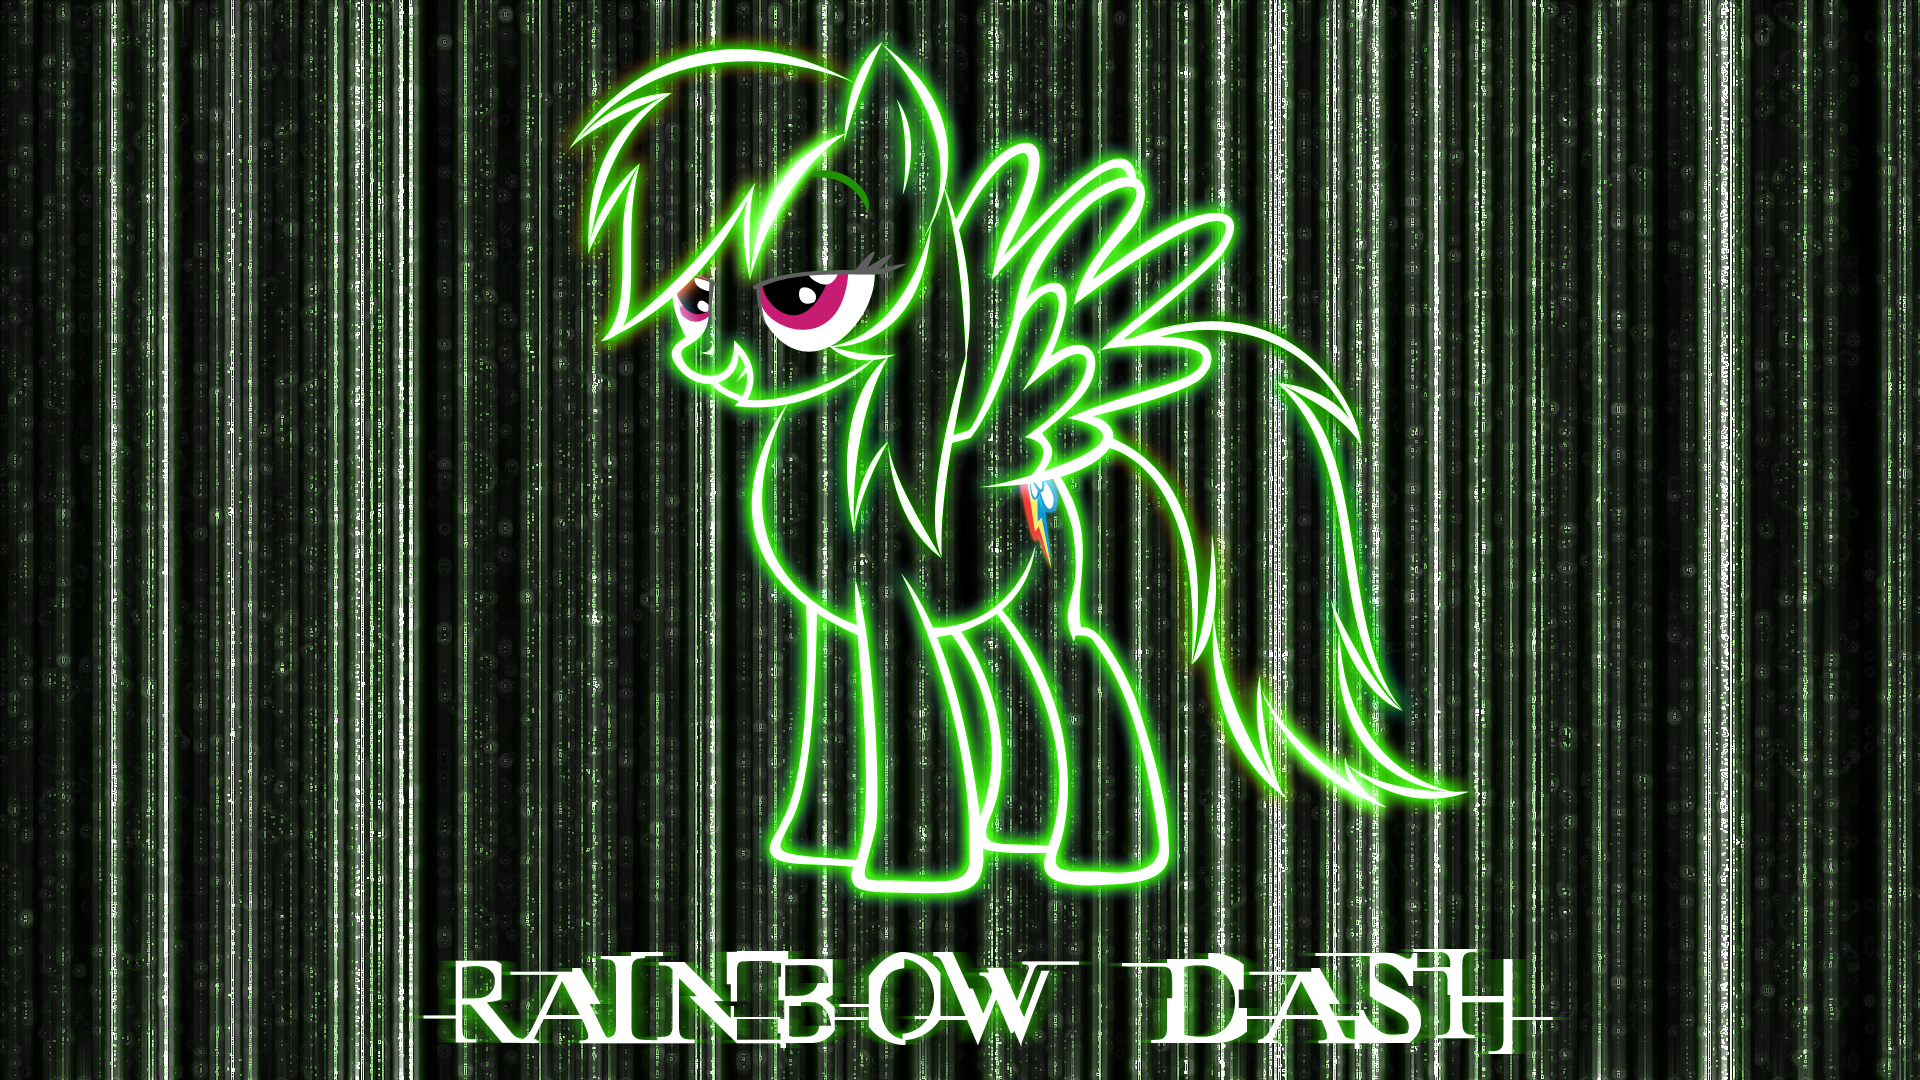 Rainbow Dash Matrix Style Wallpaper by BlueDragonHans and Sniffy92